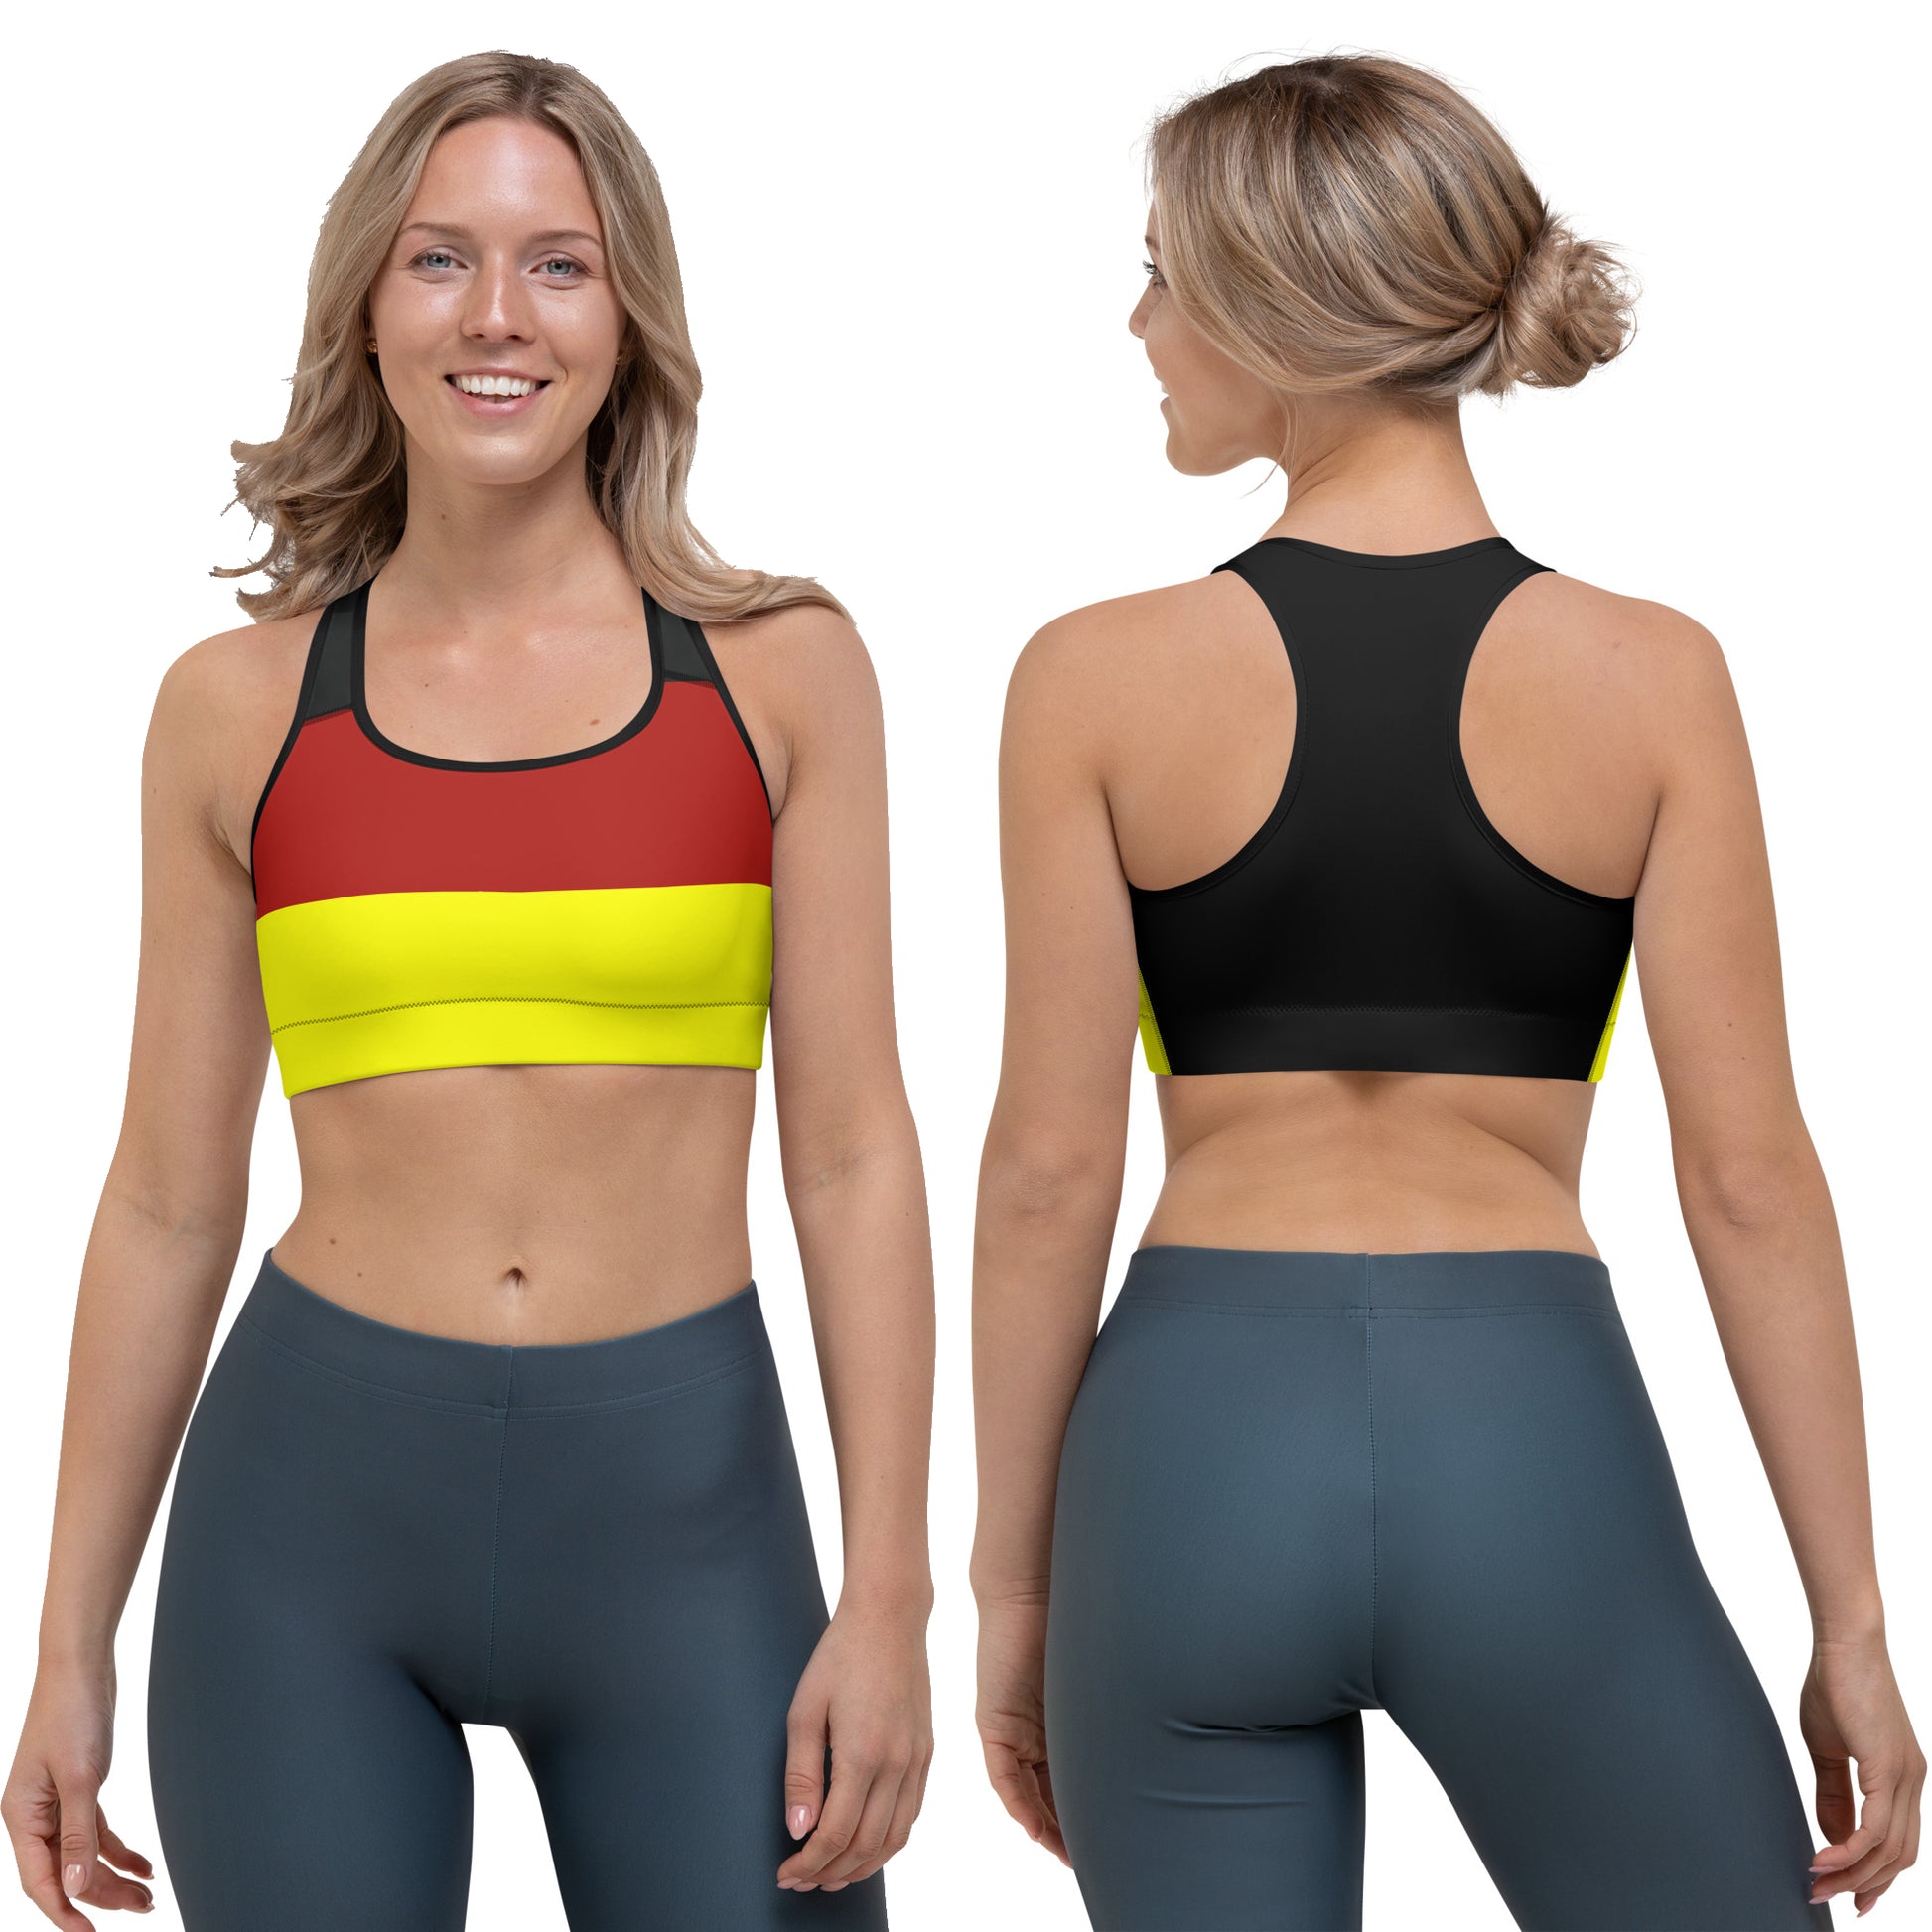 India Flag Sports Bra - Moisture-Wicking and Supportive Bra